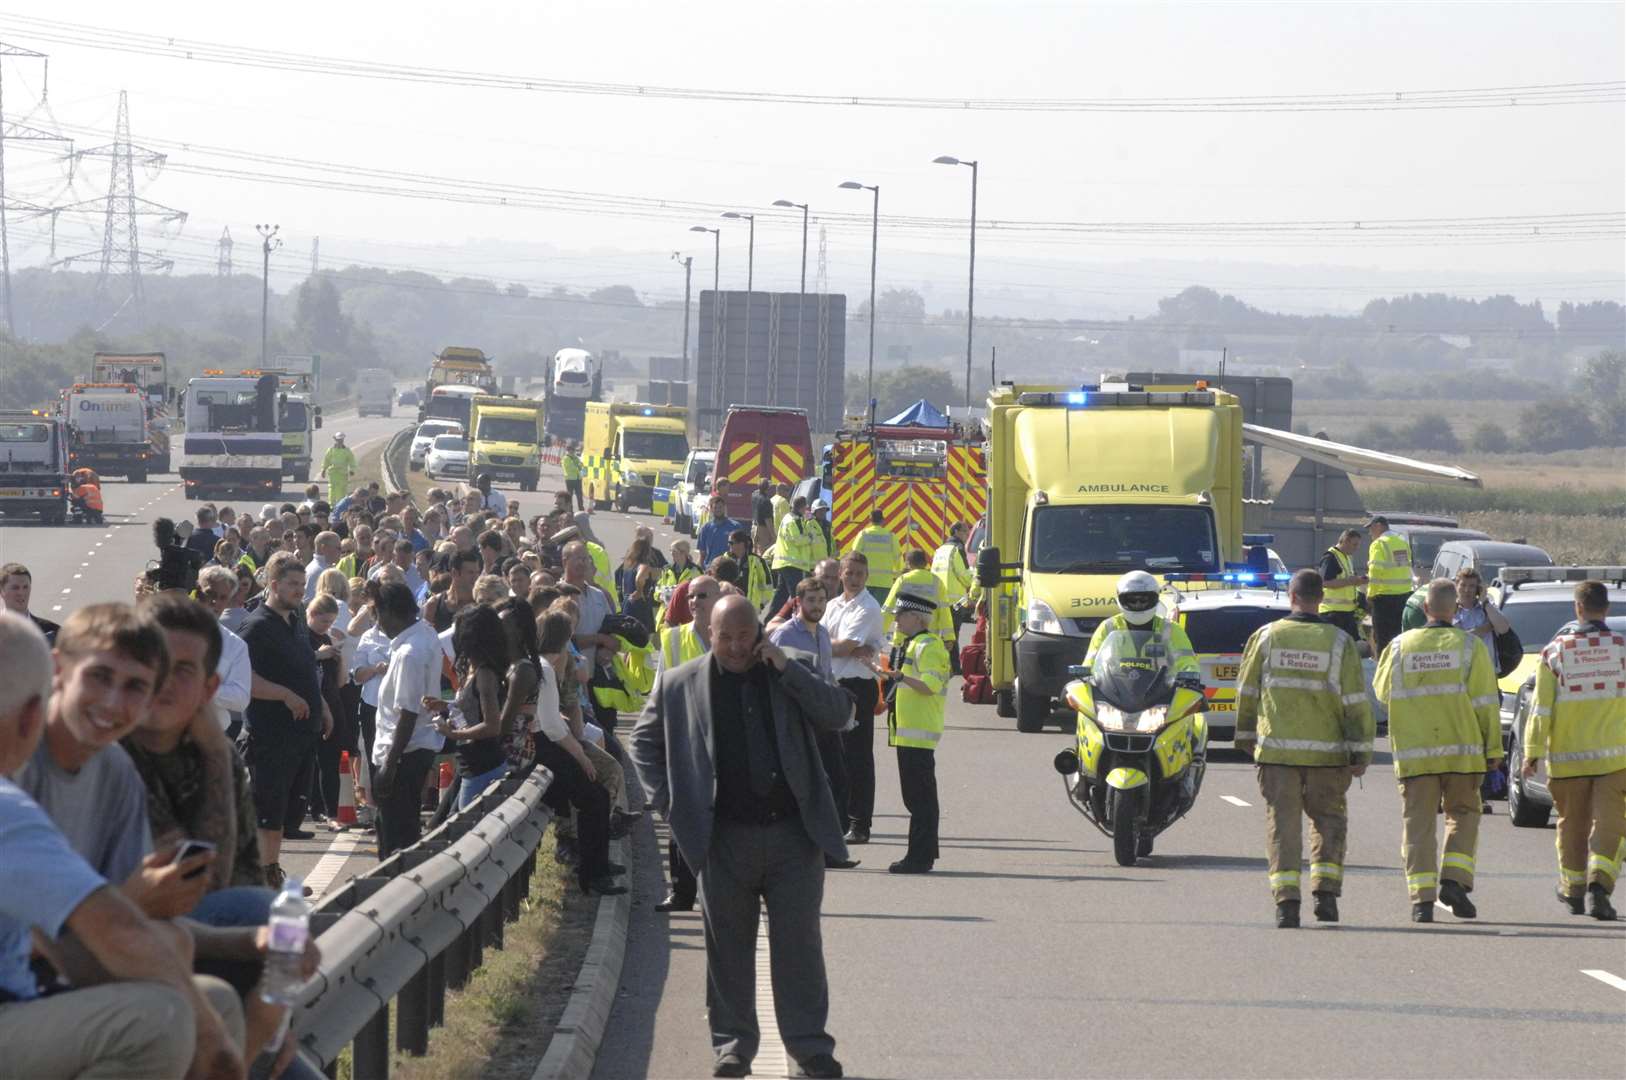 The scene at the Sheppey Crossing following the mega-crash in 2013. Picture: Chris Davey